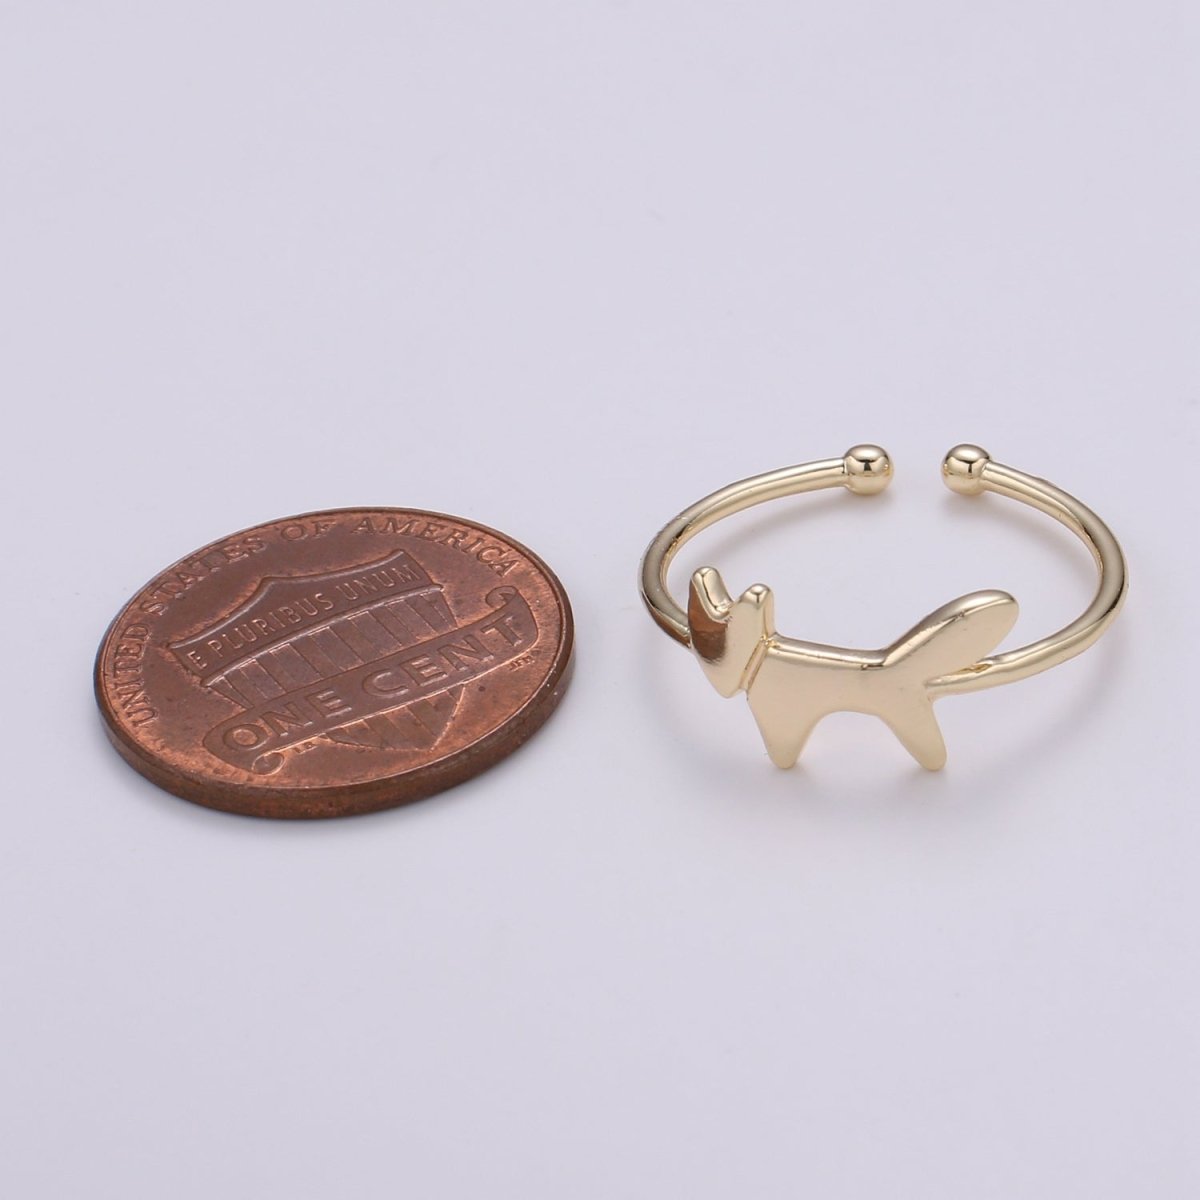 18k Gold Ring, Fox Adjustable Gold Curb Ring, Simple Animal Ring, Foxy Open Ring R-268 - DLUXCA